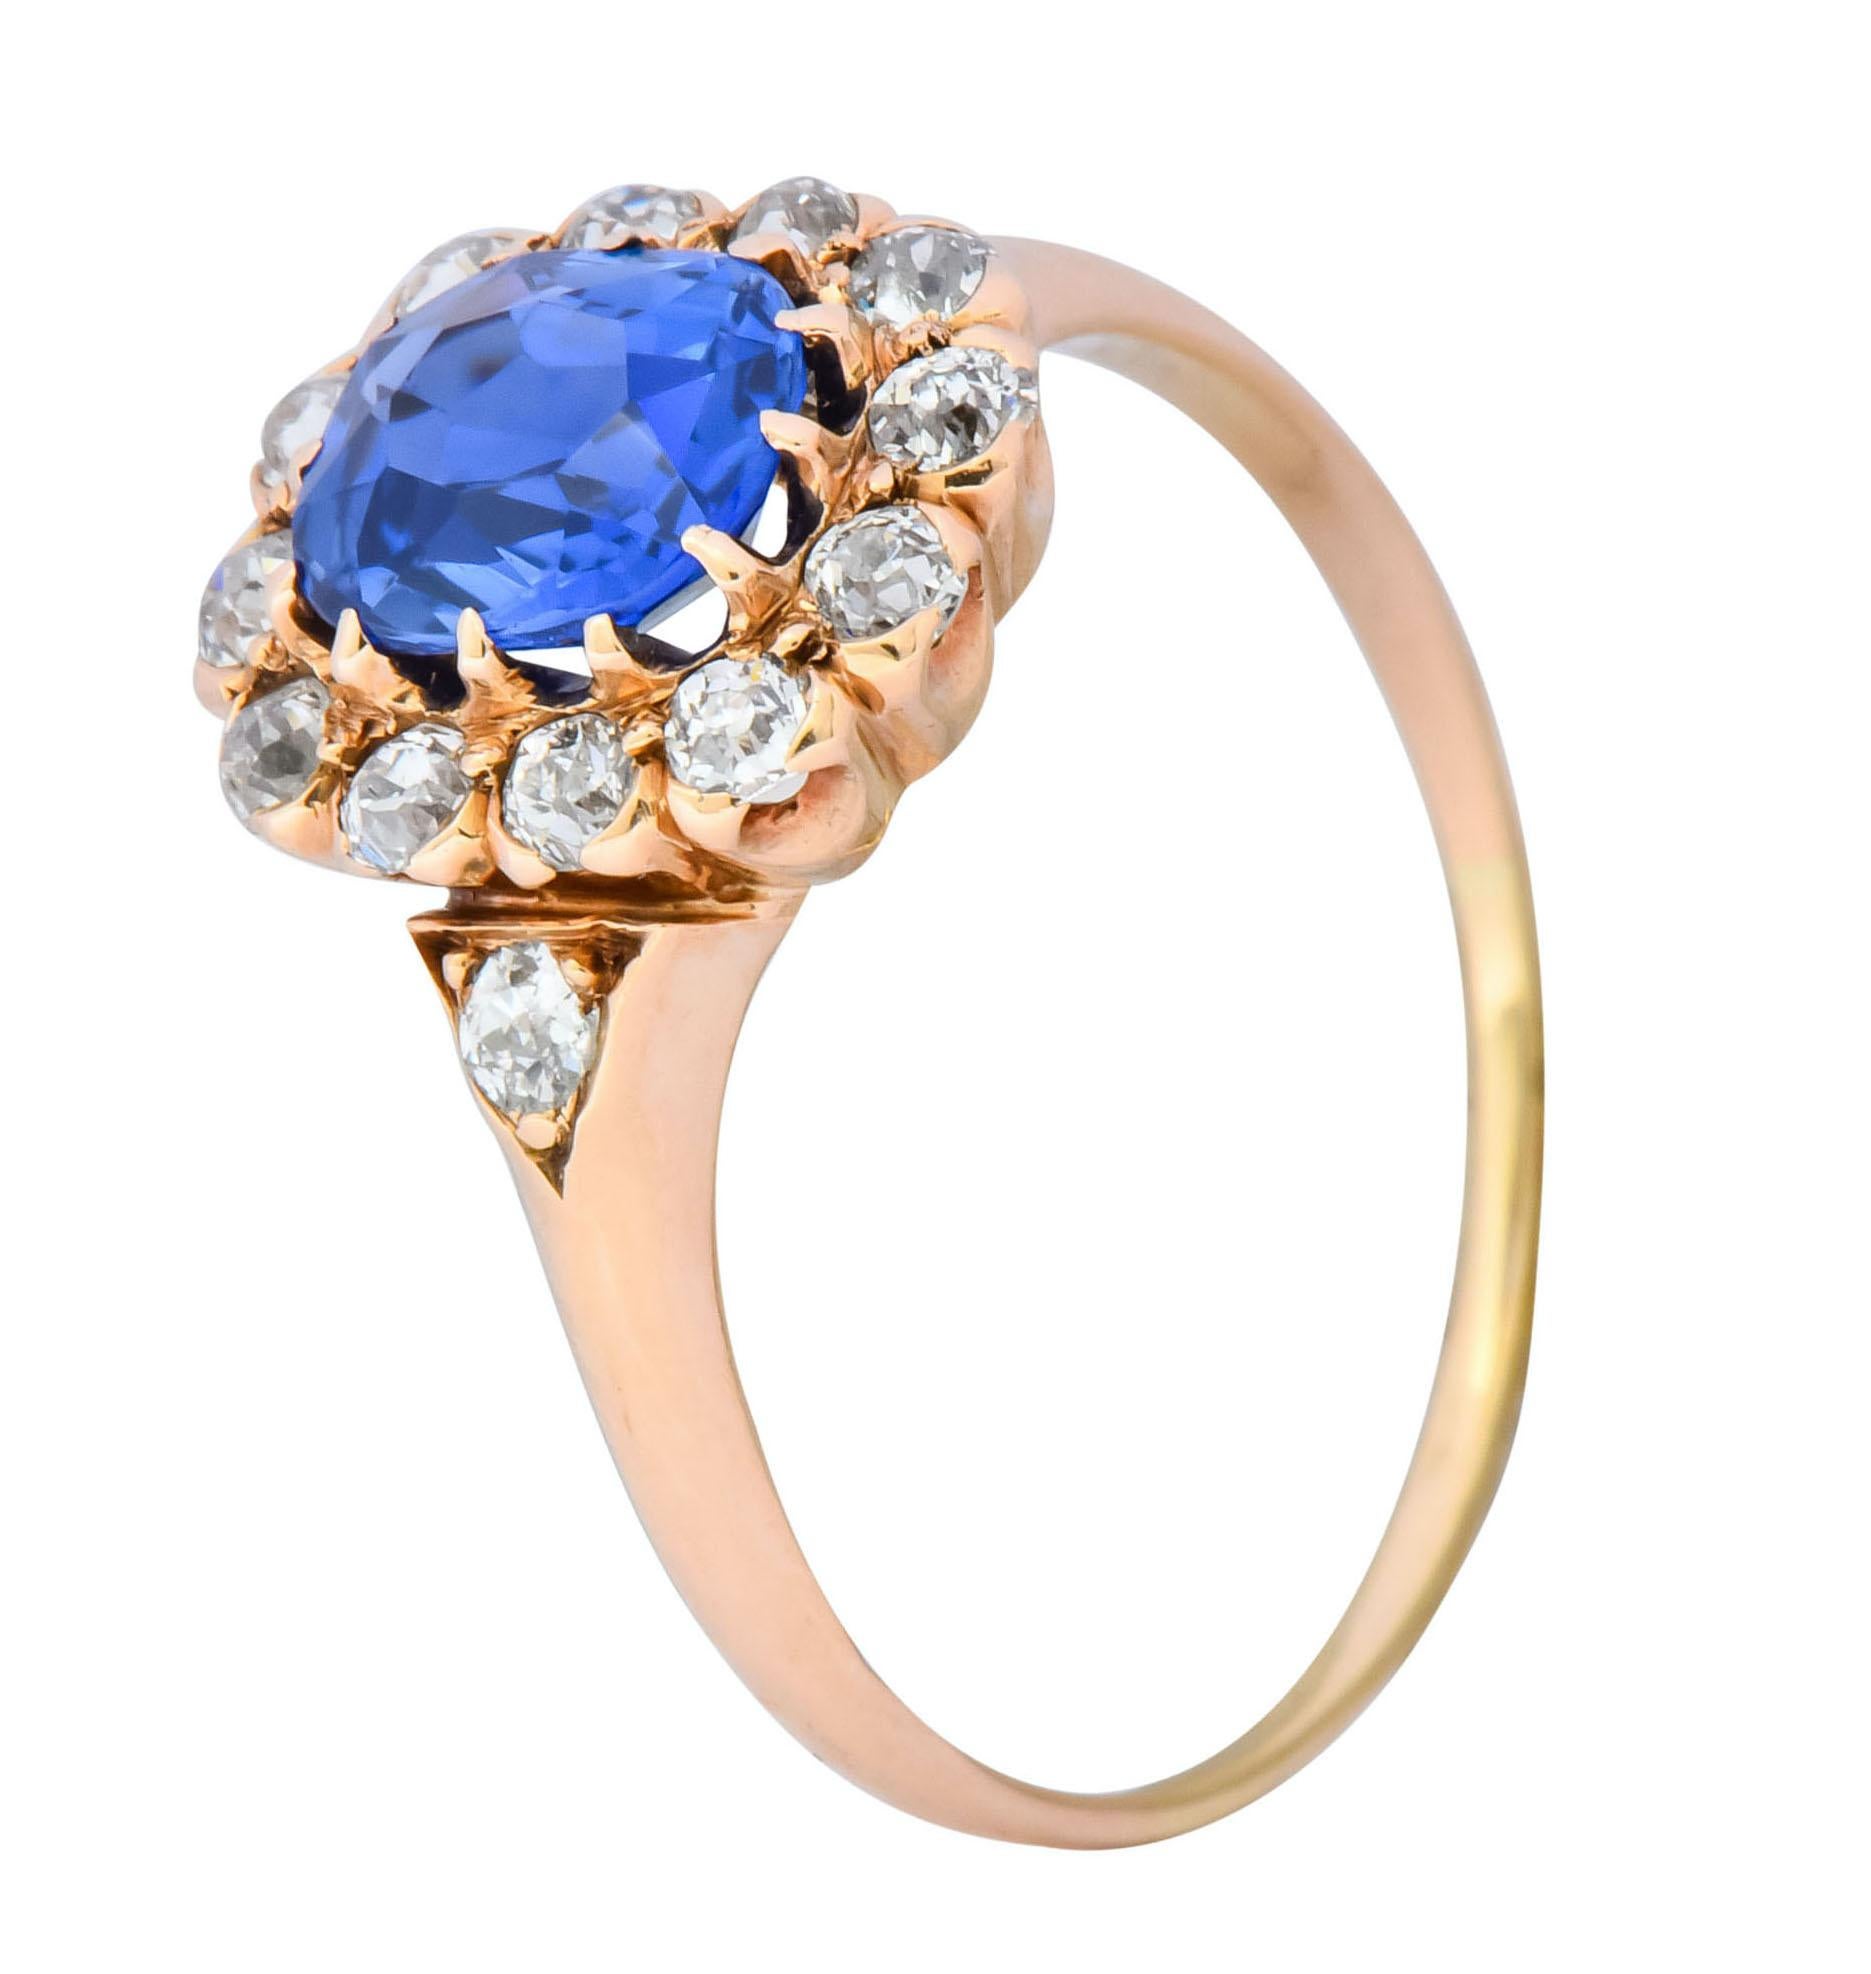 Centering an oval cut Kashmir sapphire weighing 1.10 carat, bright blue with no evidence of heat treatment 

With an old European cut diamond surround and accents, total diamond weight approximately 0.50 carat, G to J color and VS to SI